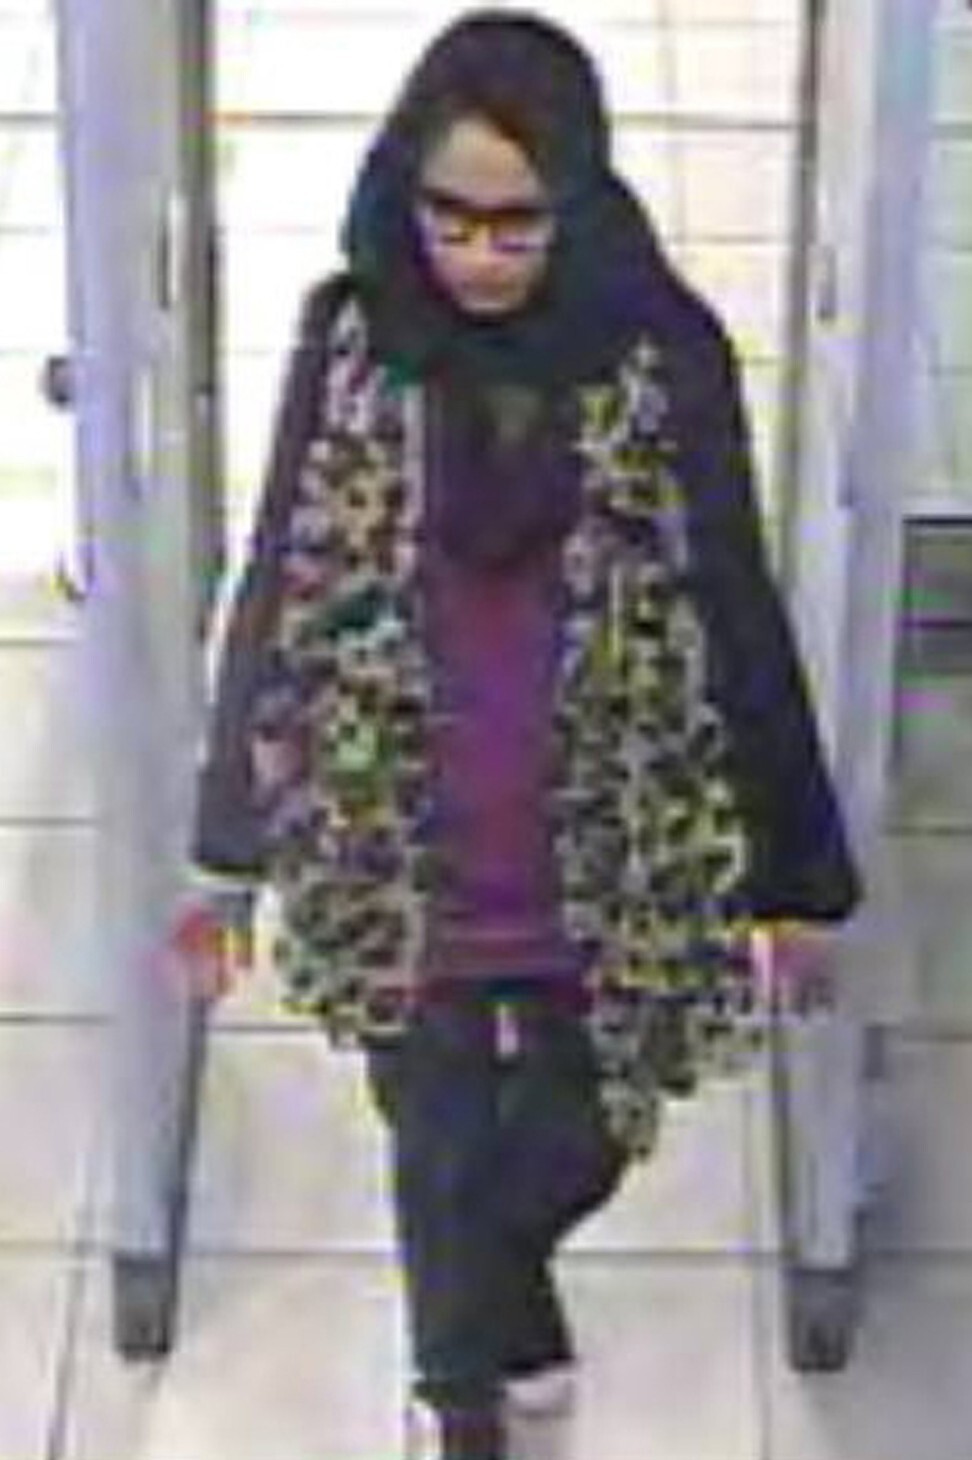 A video grab from CCTV footage shows Shamima Begum passing through security barriers at Gatwick Airport in February 2015. Photo: Metropolitan Police handout via AFP